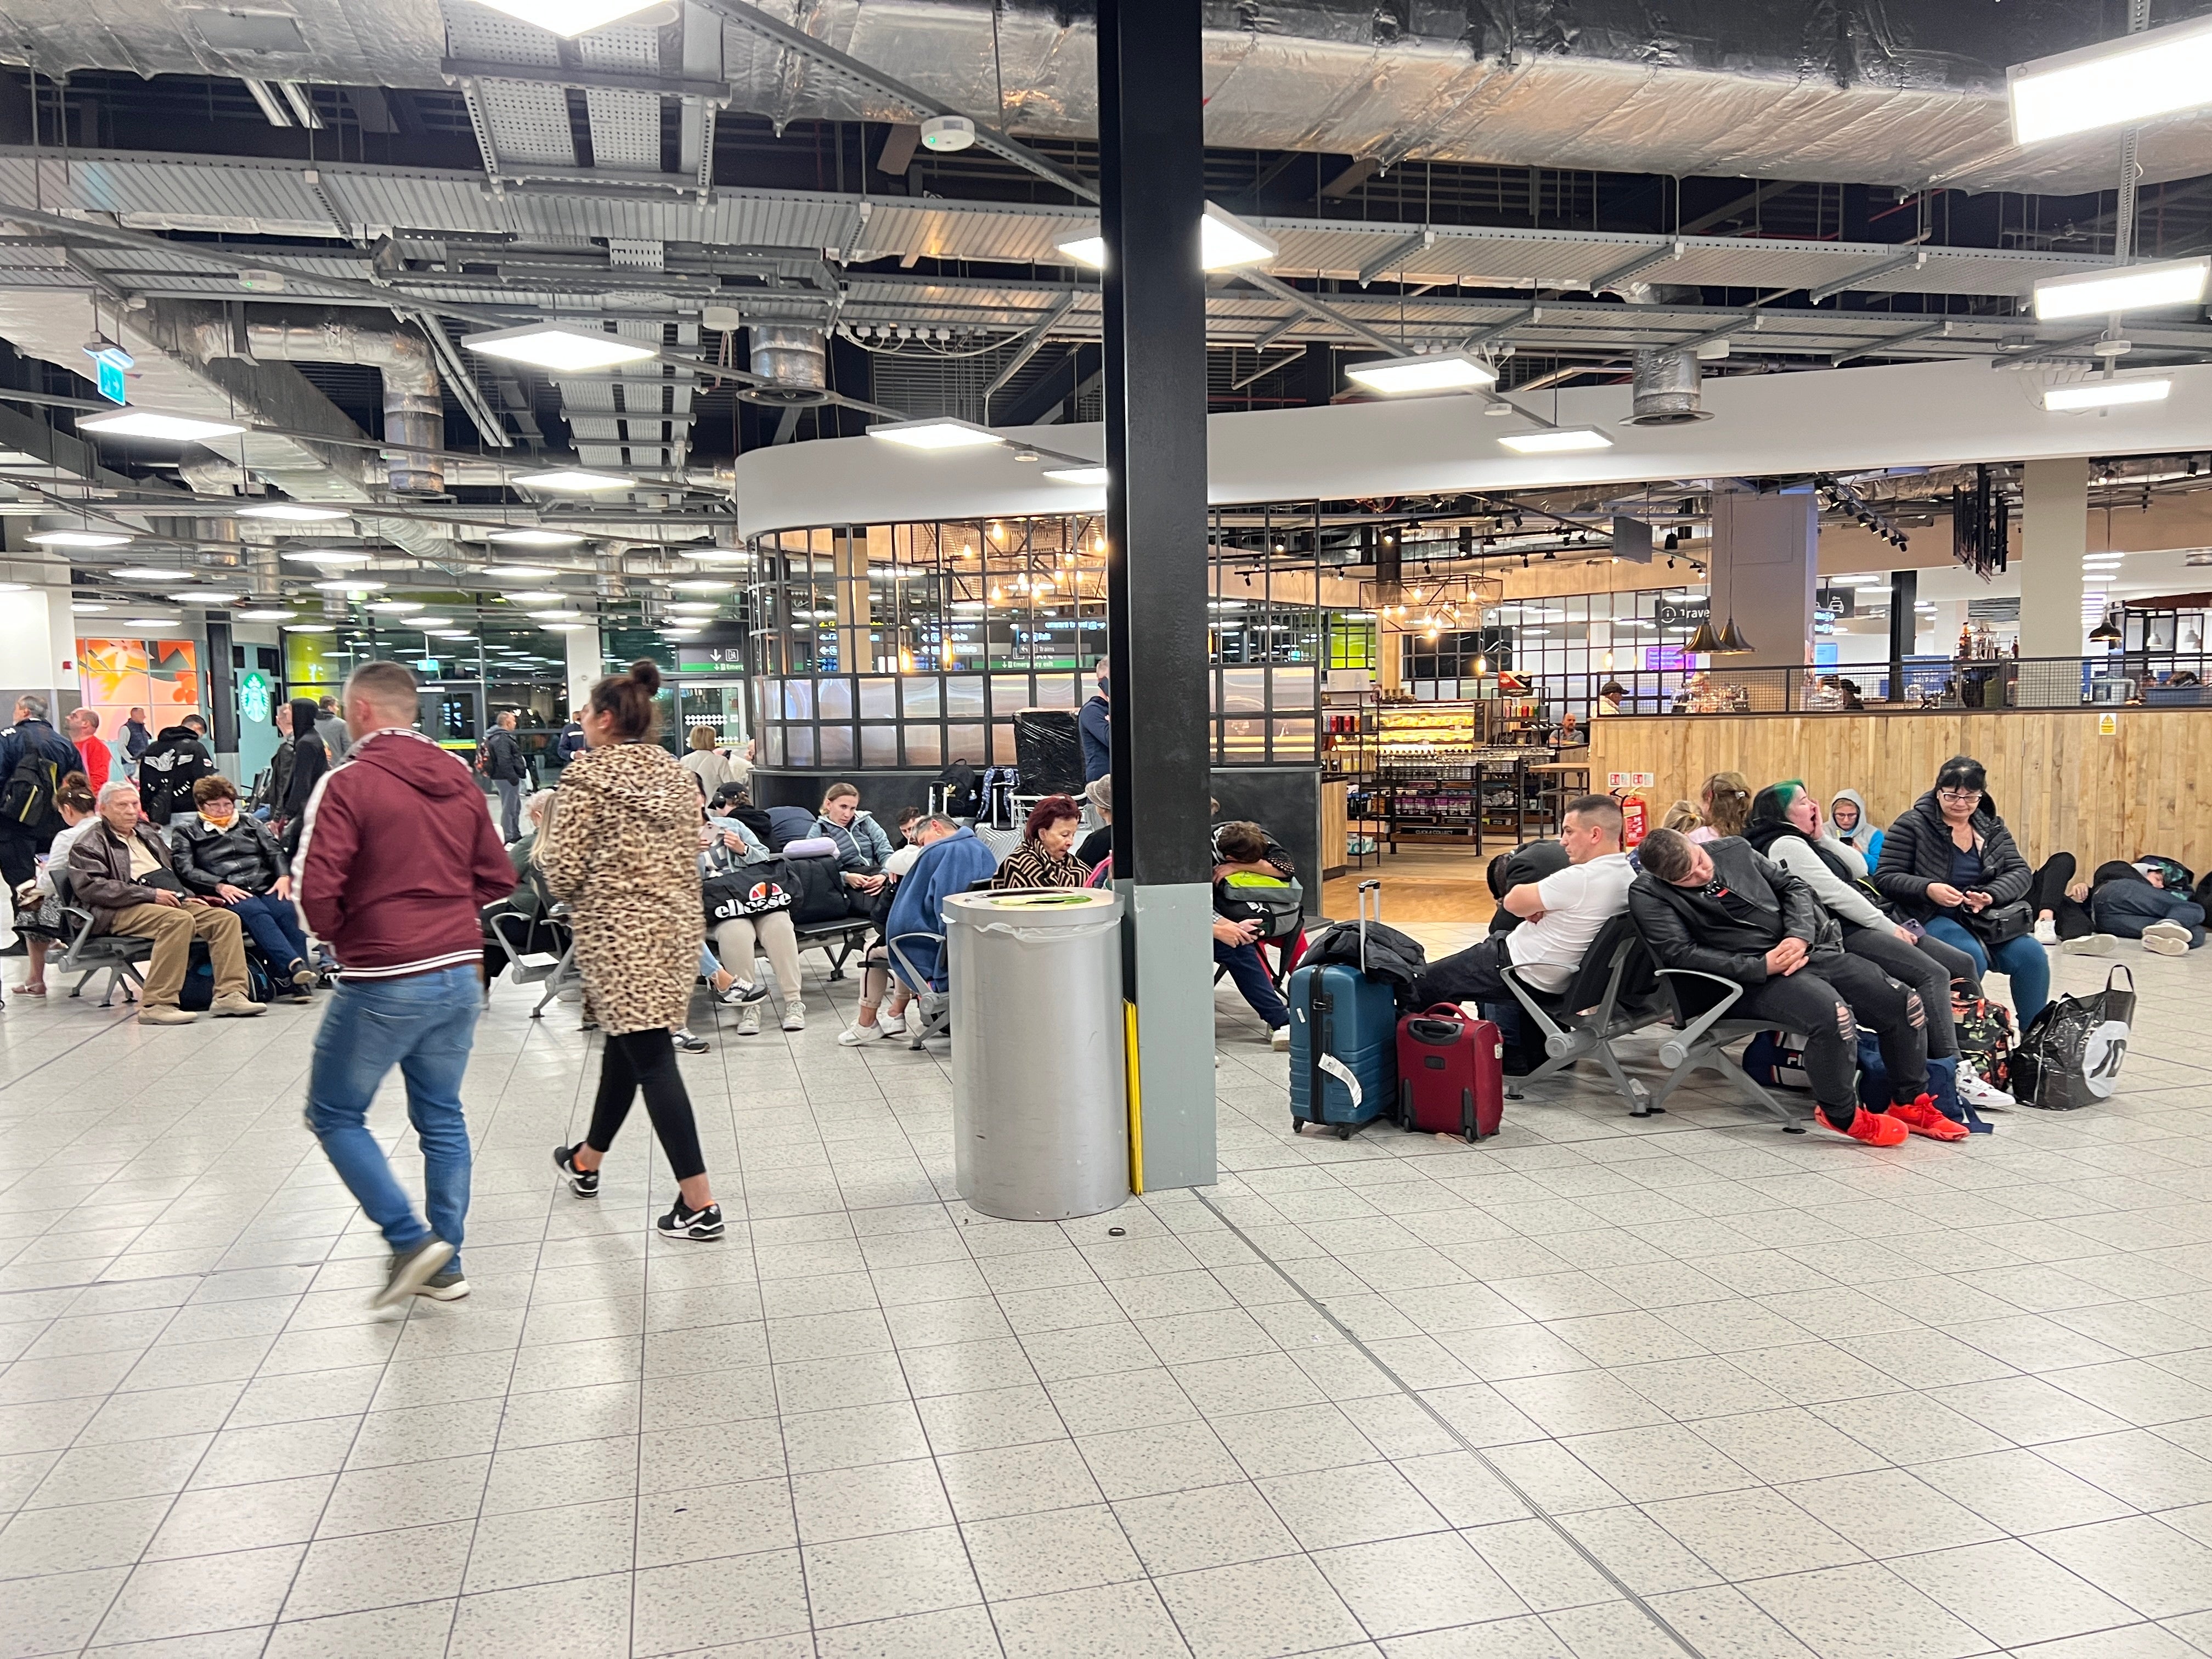 Passengers wait at Luton Airport after flights cancelled until Wednesday noon following fire at the car park